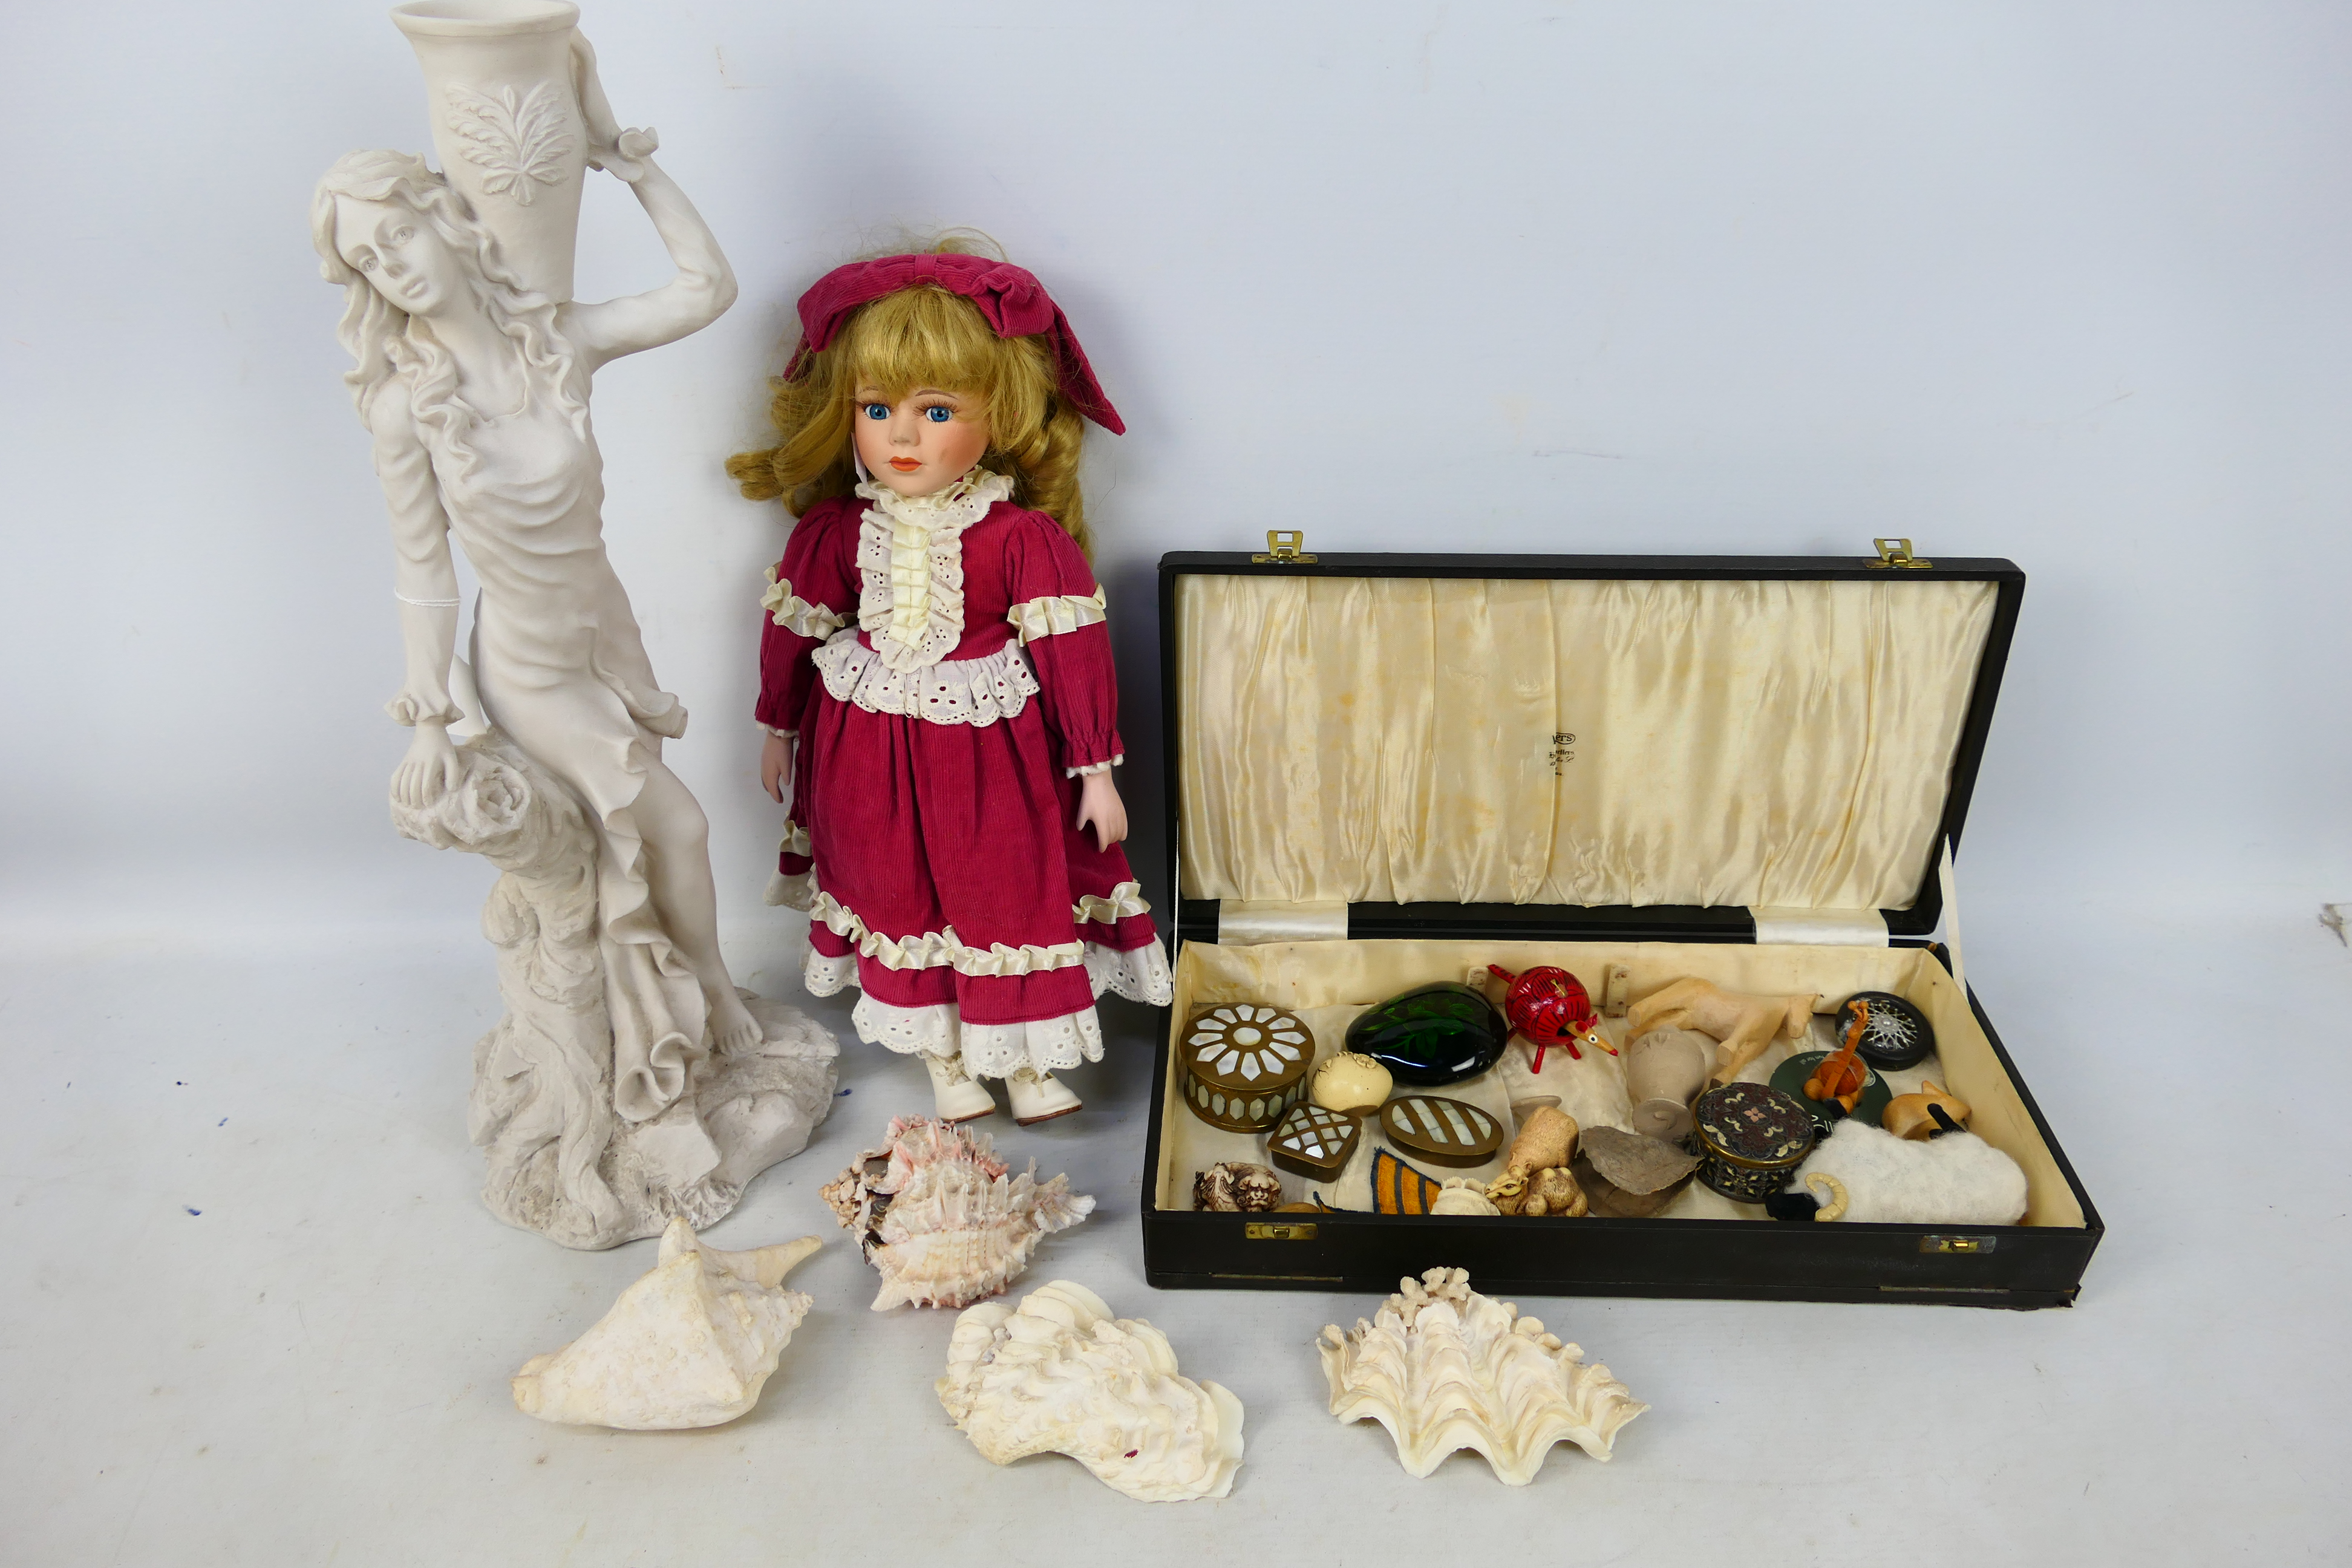 Mixed collectables to include trinket boxes, shells, doll and similar.